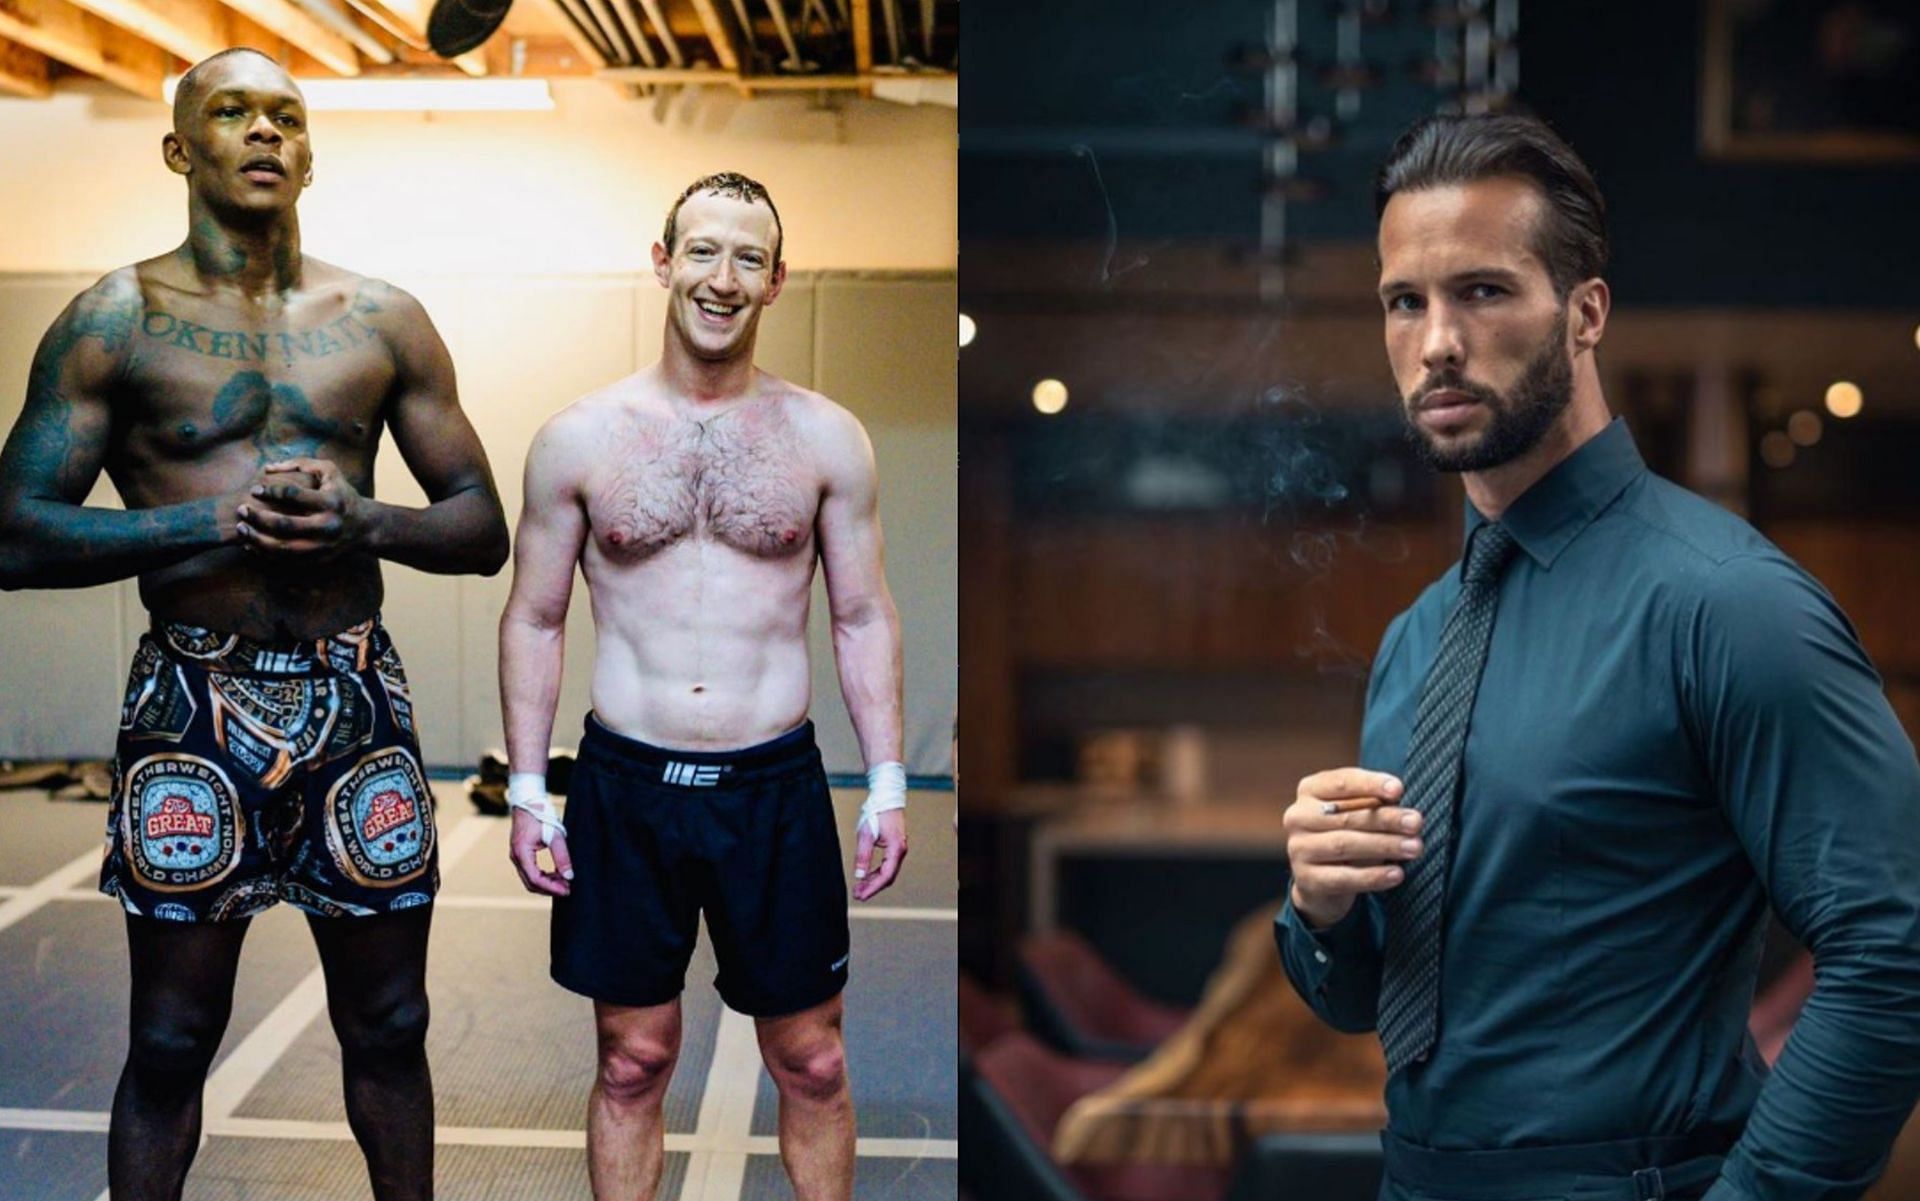 Tristan Tate (right) commends Mark Zuckerberg (middle) for fitness journey and martial arts interest [Images via @zuck and @tristantateuncensored on Instagram]